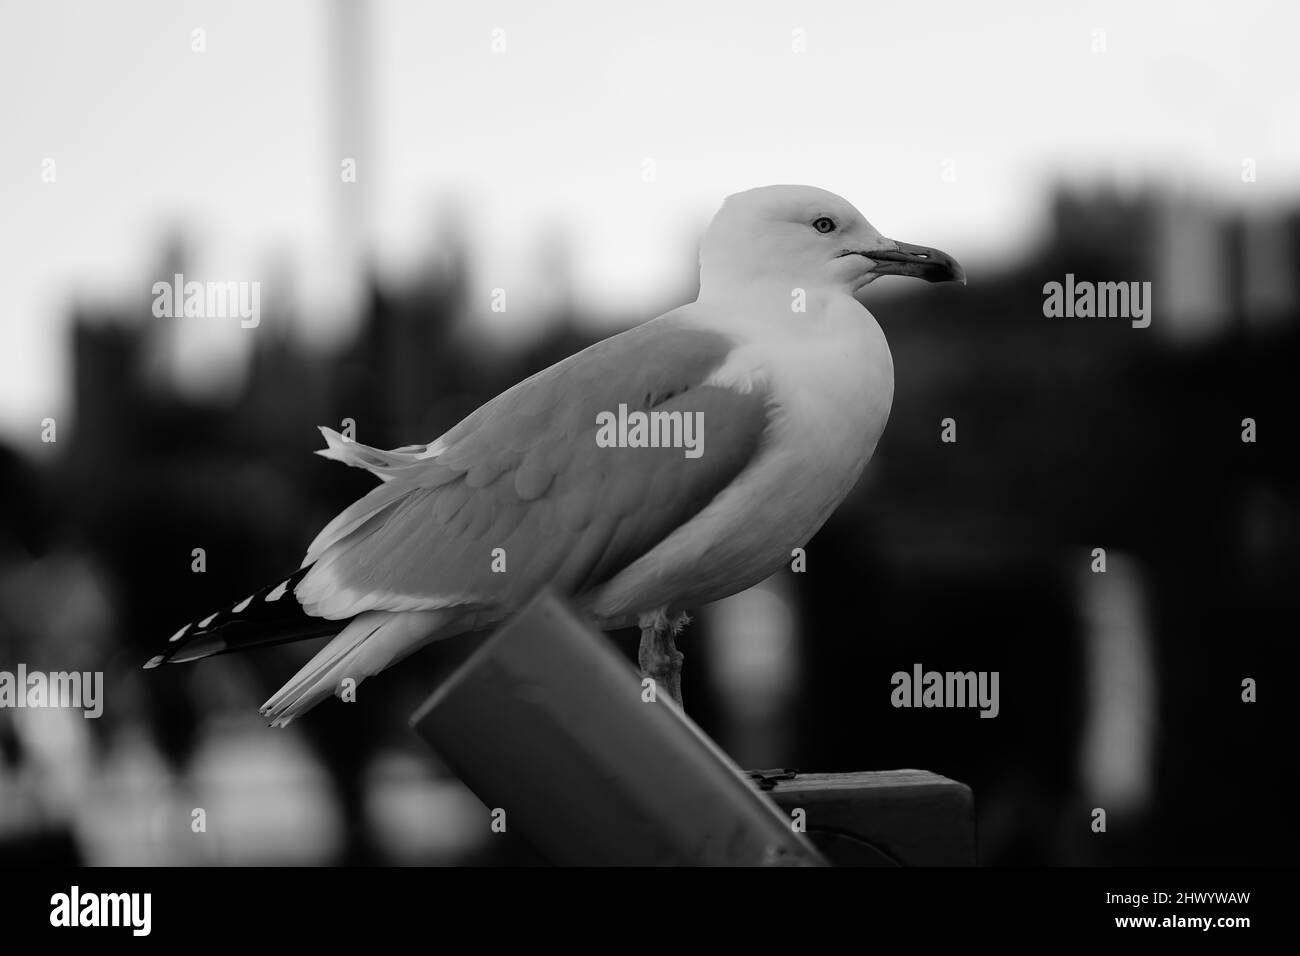 Herring gull seagull black and white side profile image bird perched on telescope Stock Photo